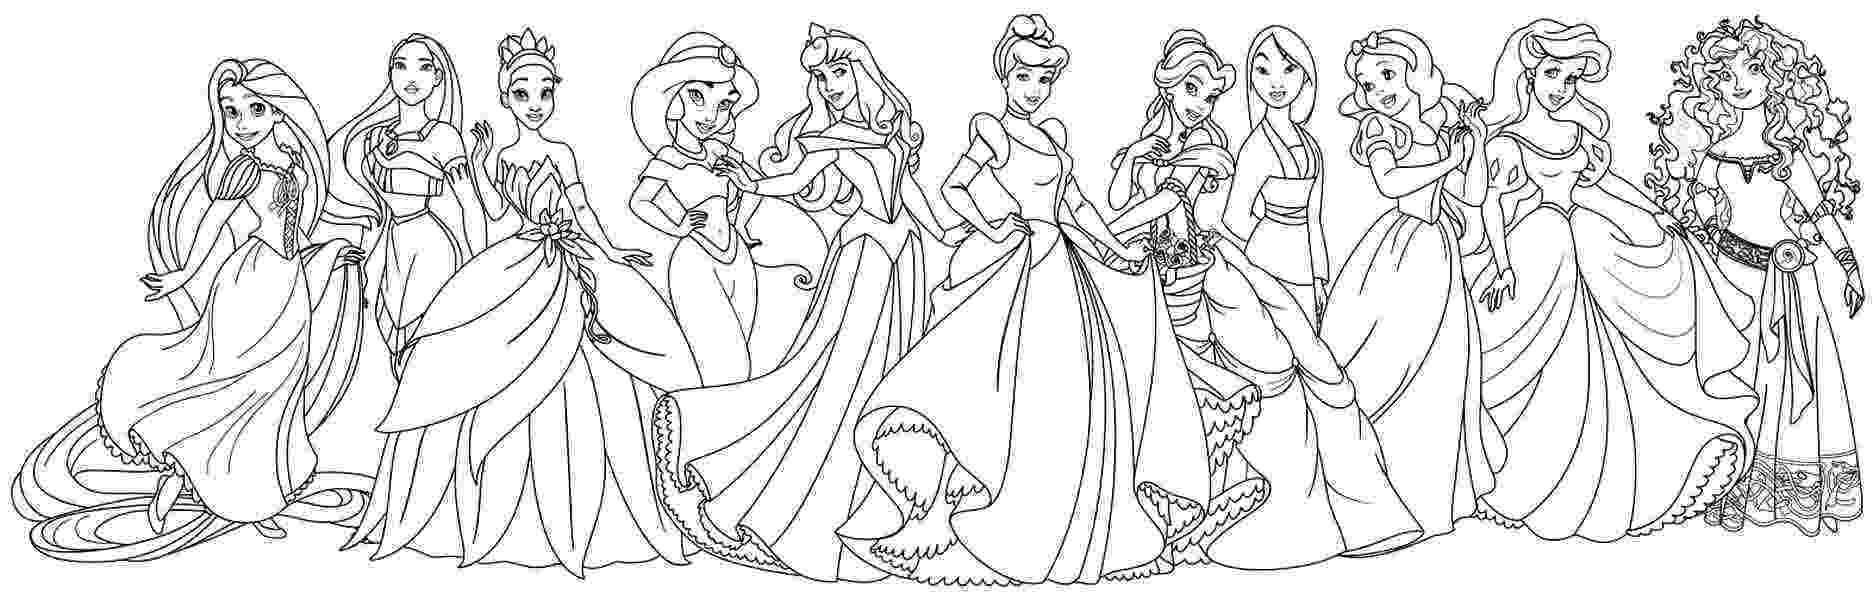 coloring pages disney princesses together disney princess characters coloring pages coloring home pages disney princesses coloring together 